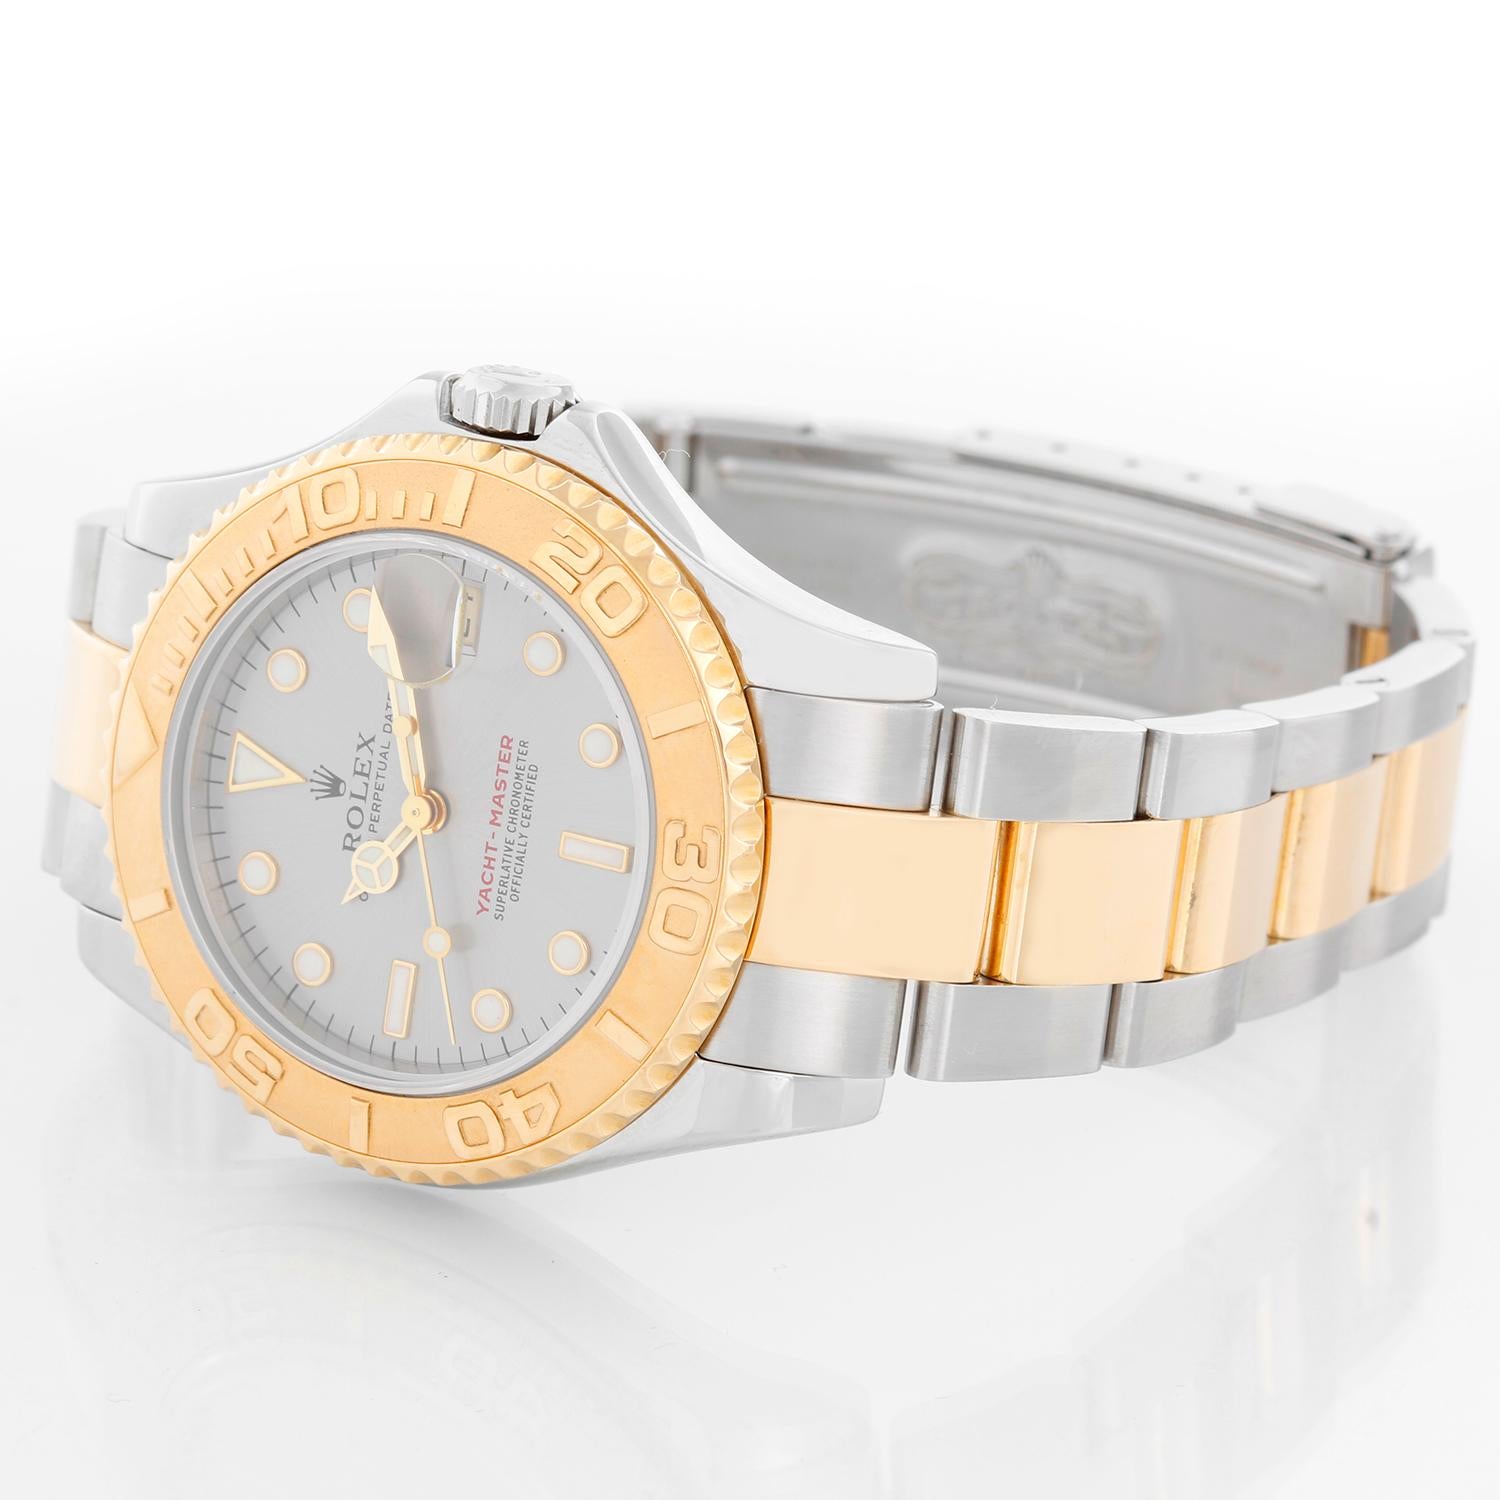 Rolex Yacht-Master Midsize  Men's/Ladies Steel & Gold 2 Tone Watch 68623 - Automatic winding, 31 jewels, Quickset, sapphire crystal. Stainless steel case with 18k yellow gold rotating bezel (35mm diameter). Silver dial with luminous style markers.